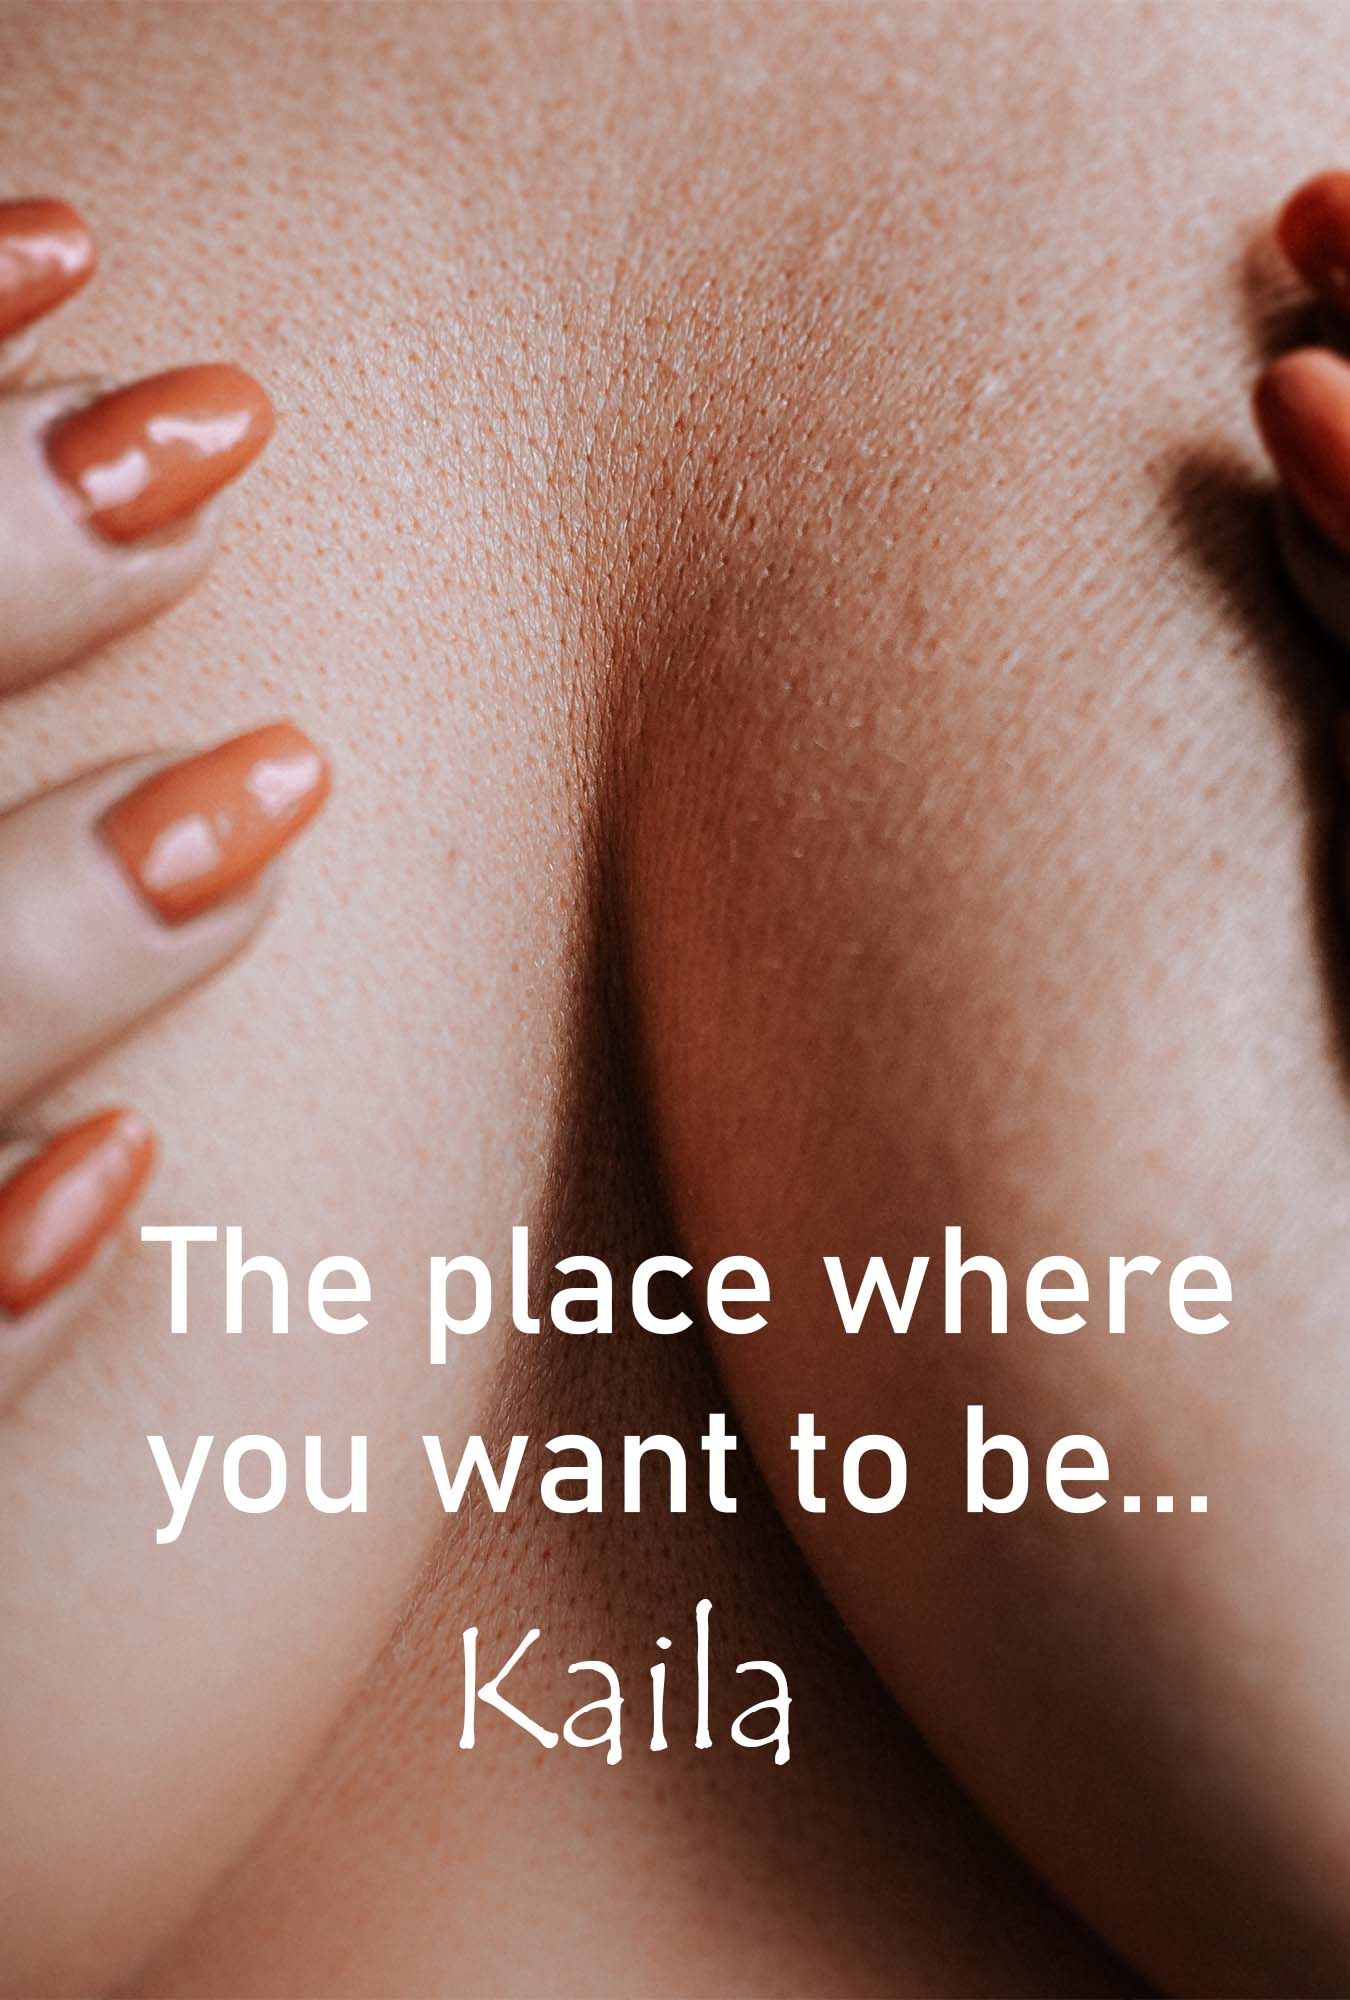 The place where you want to be, with Kaila.